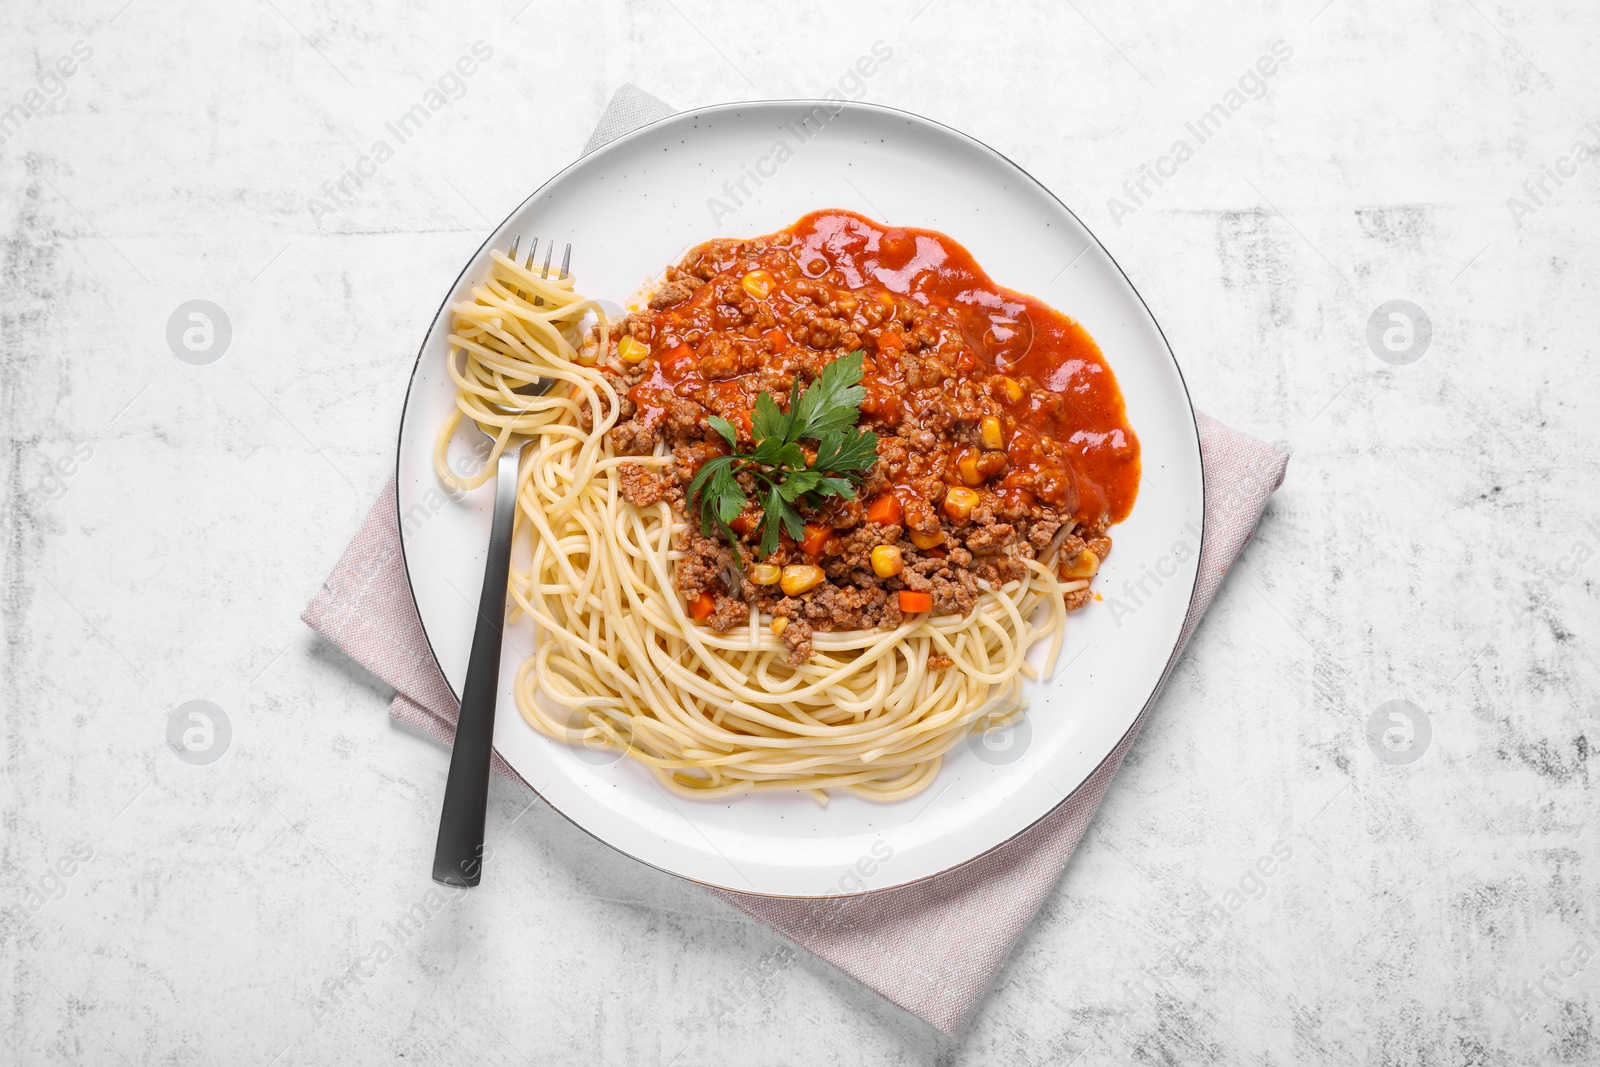 Photo of Tasty dish with fried minced meat, spaghetti, carrot and corn served on white textured table, top view